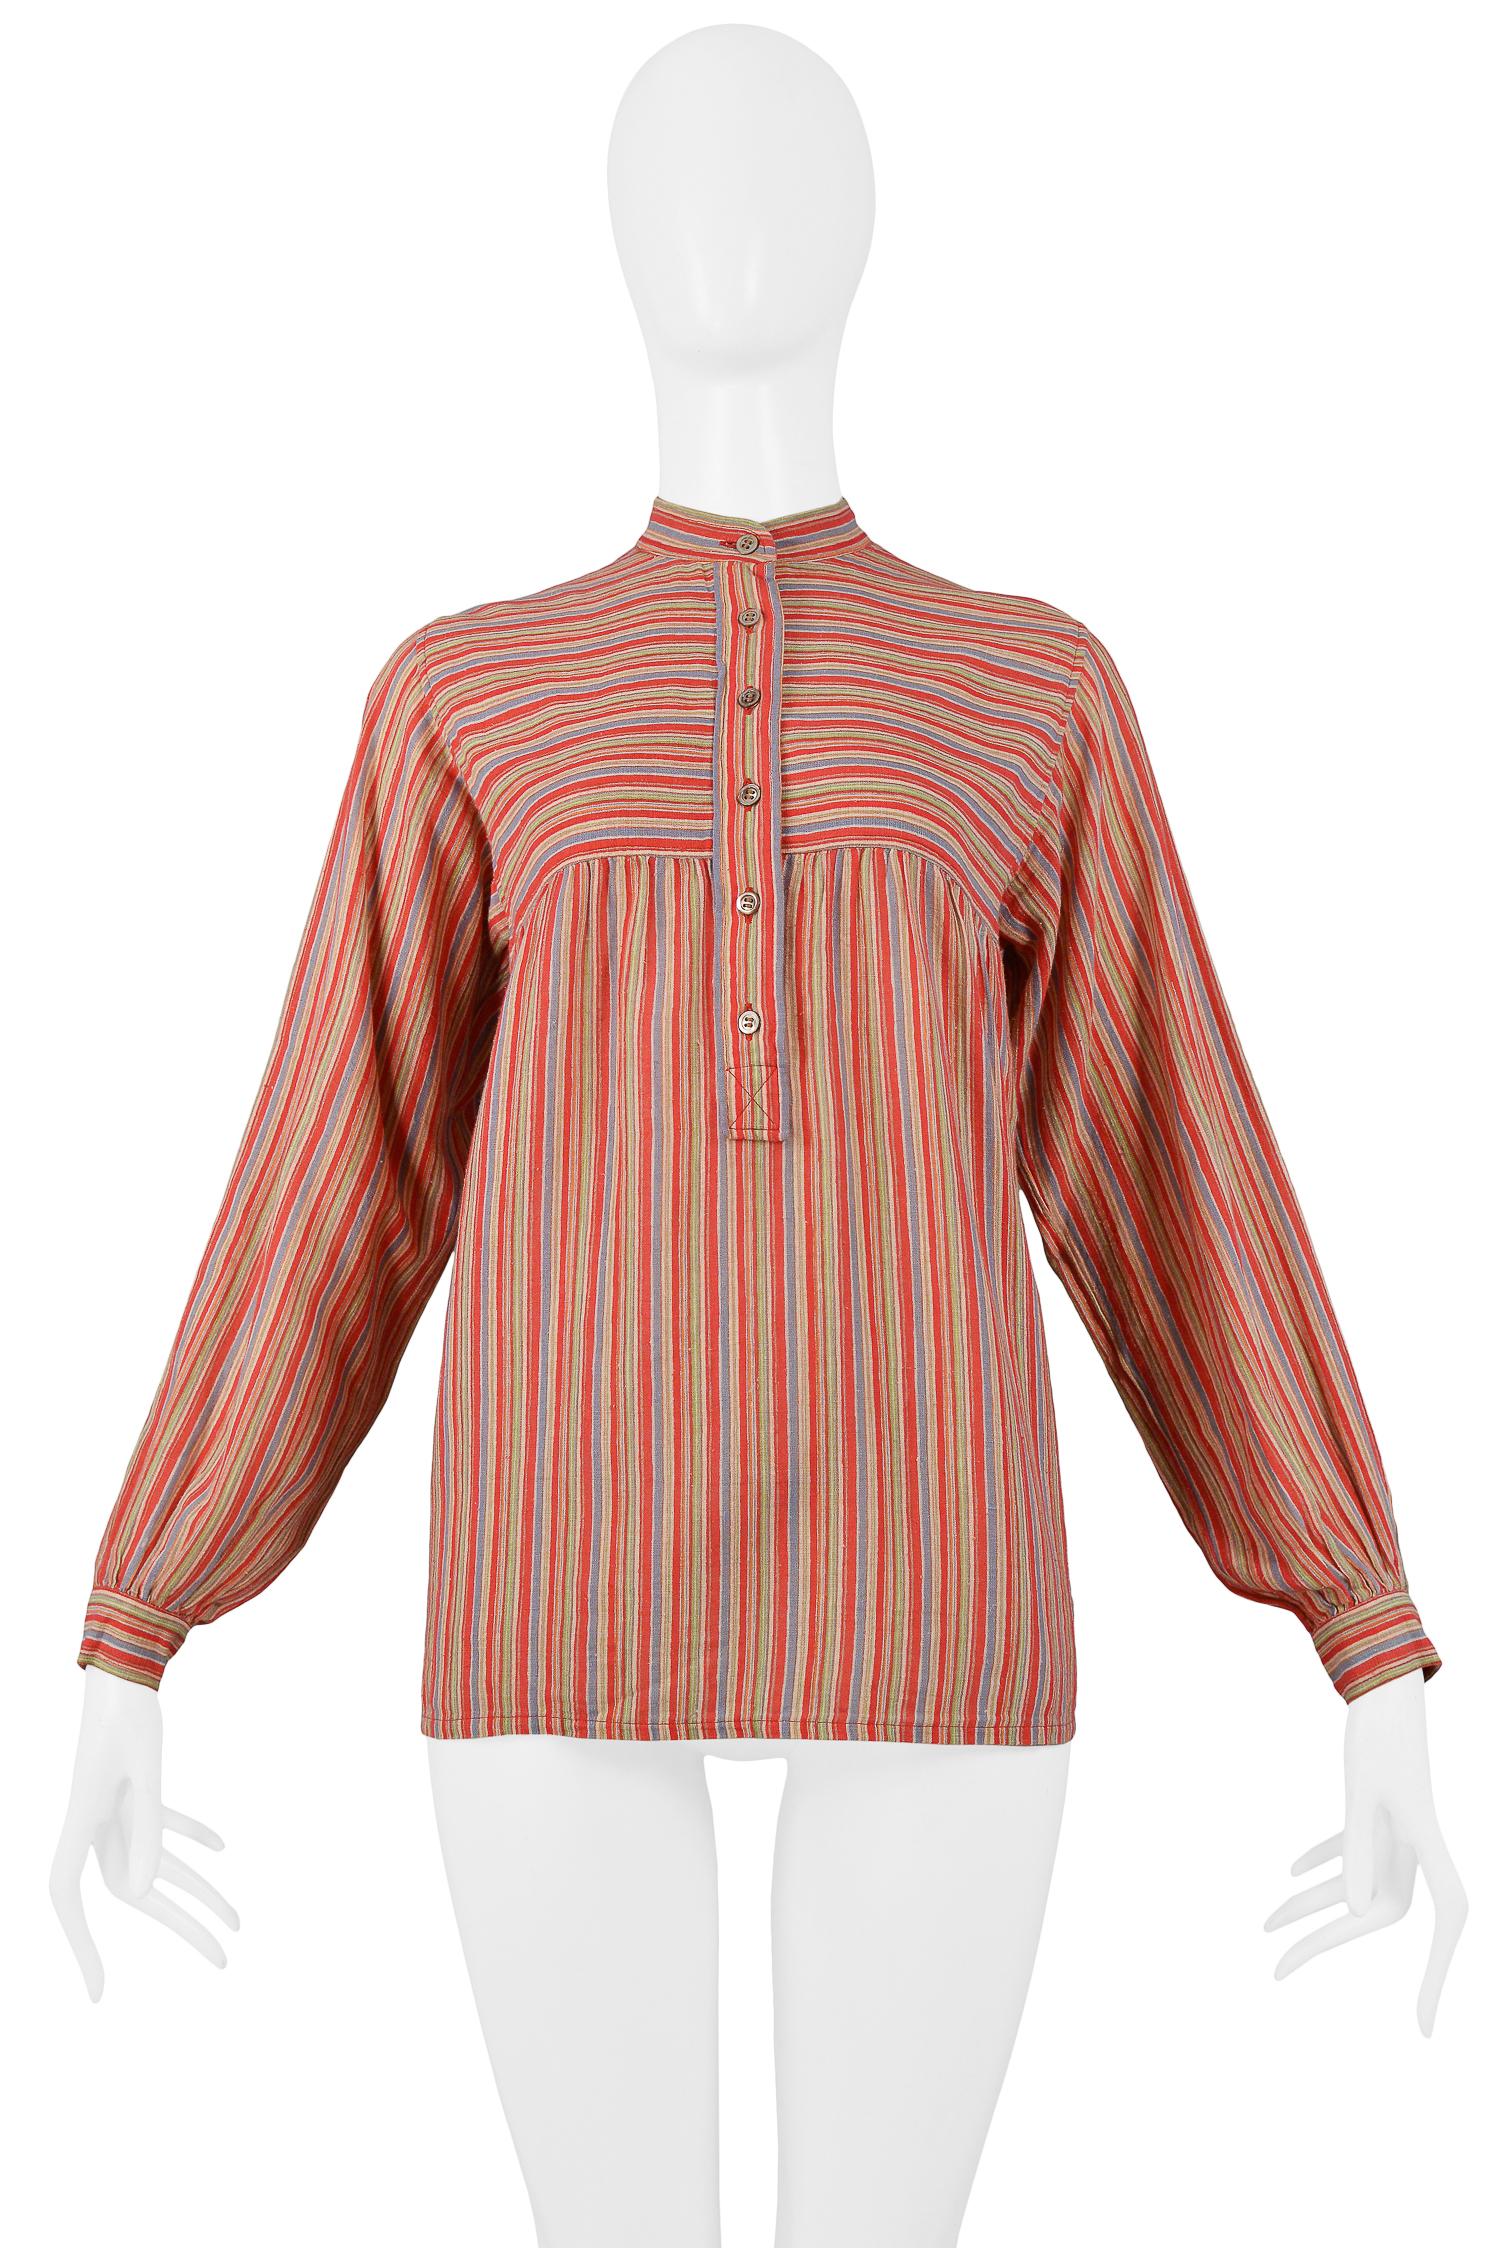 Vintage Yves Saint Laurent red stripe cotton blouse featuring a partial button front, high collar and button cuff detailing at wrists. Circa 1970's.

Excellent Condition.

Size: 36